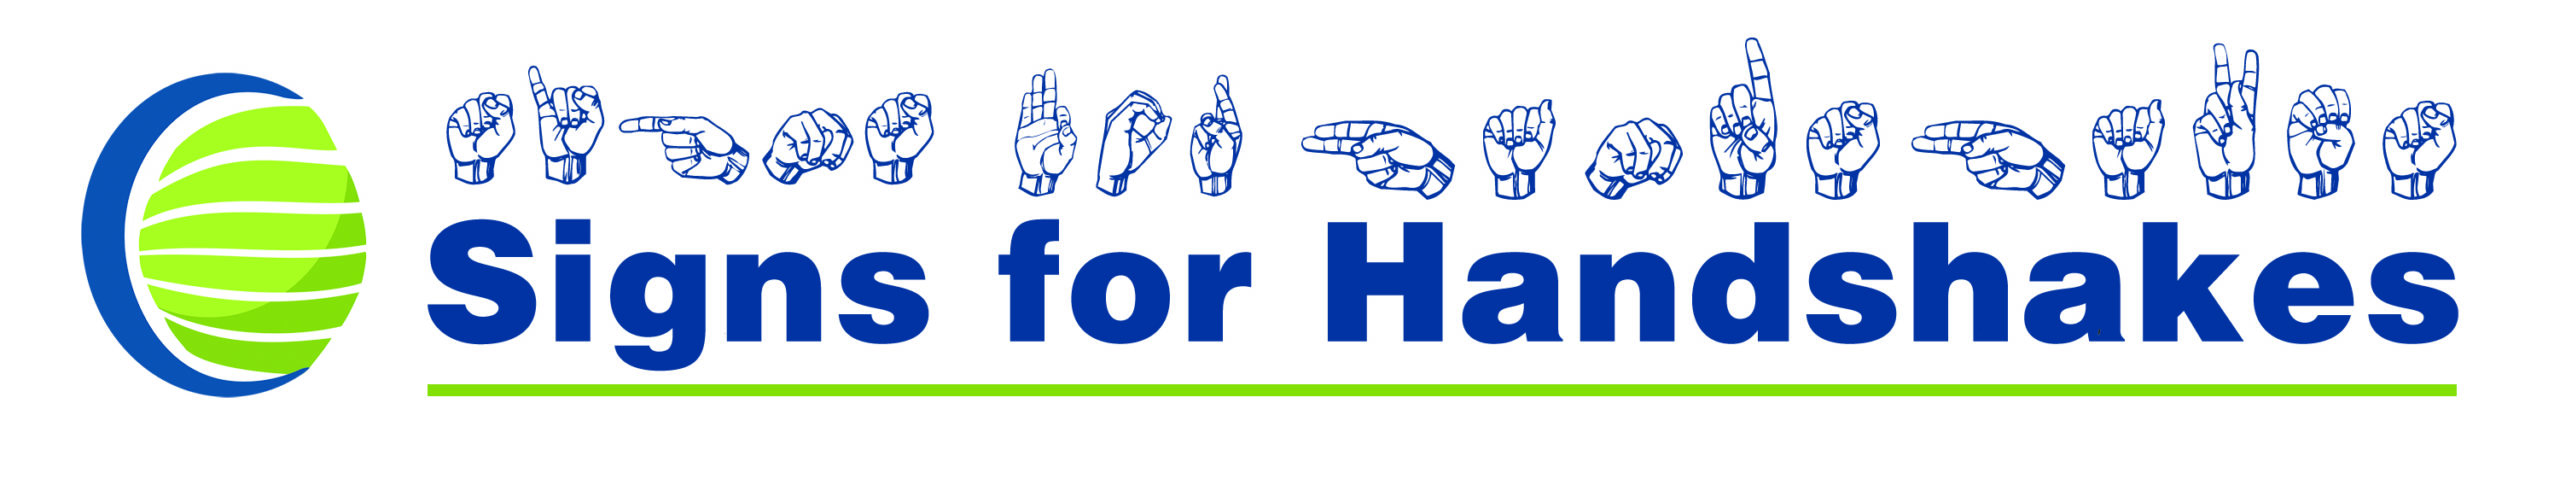 Signs for Handshakes Logo